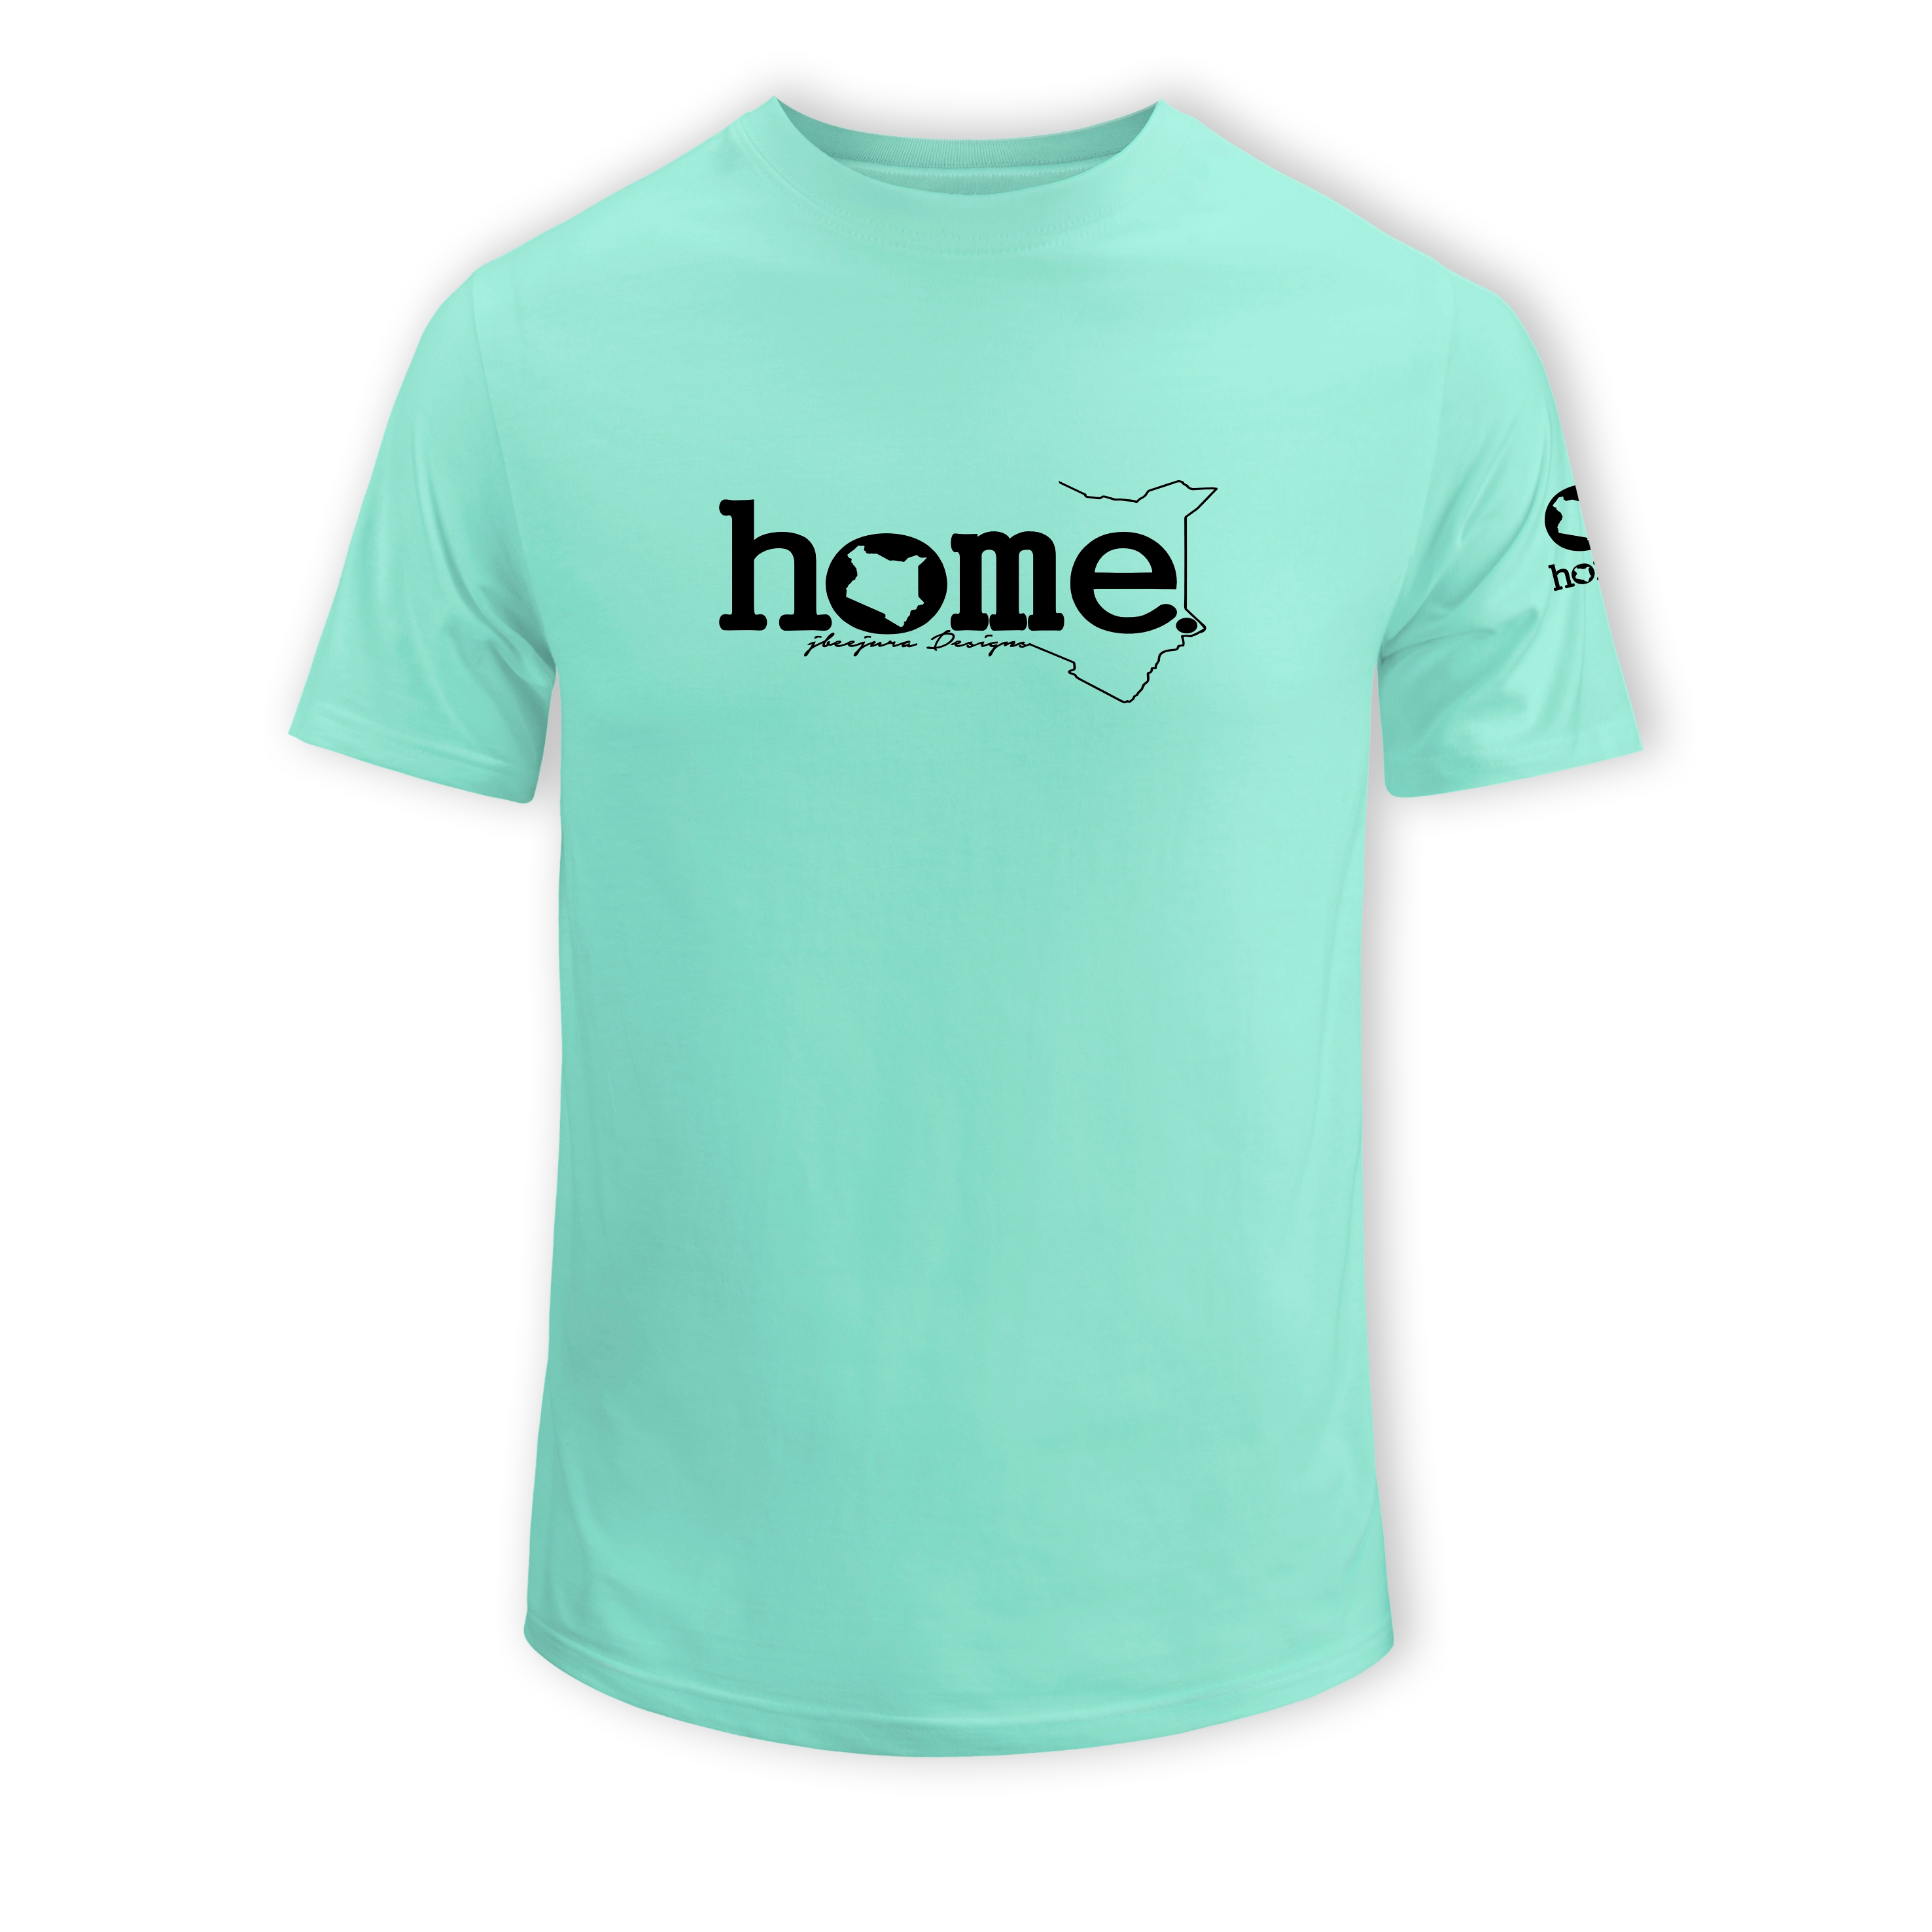 home_254 KIDS SHORT-SLEEVED TURQUOISE GREEN T-SHIRT WITH A BLACK CLASSIC WORDS PRINT – COTTON PLUS FABRIC